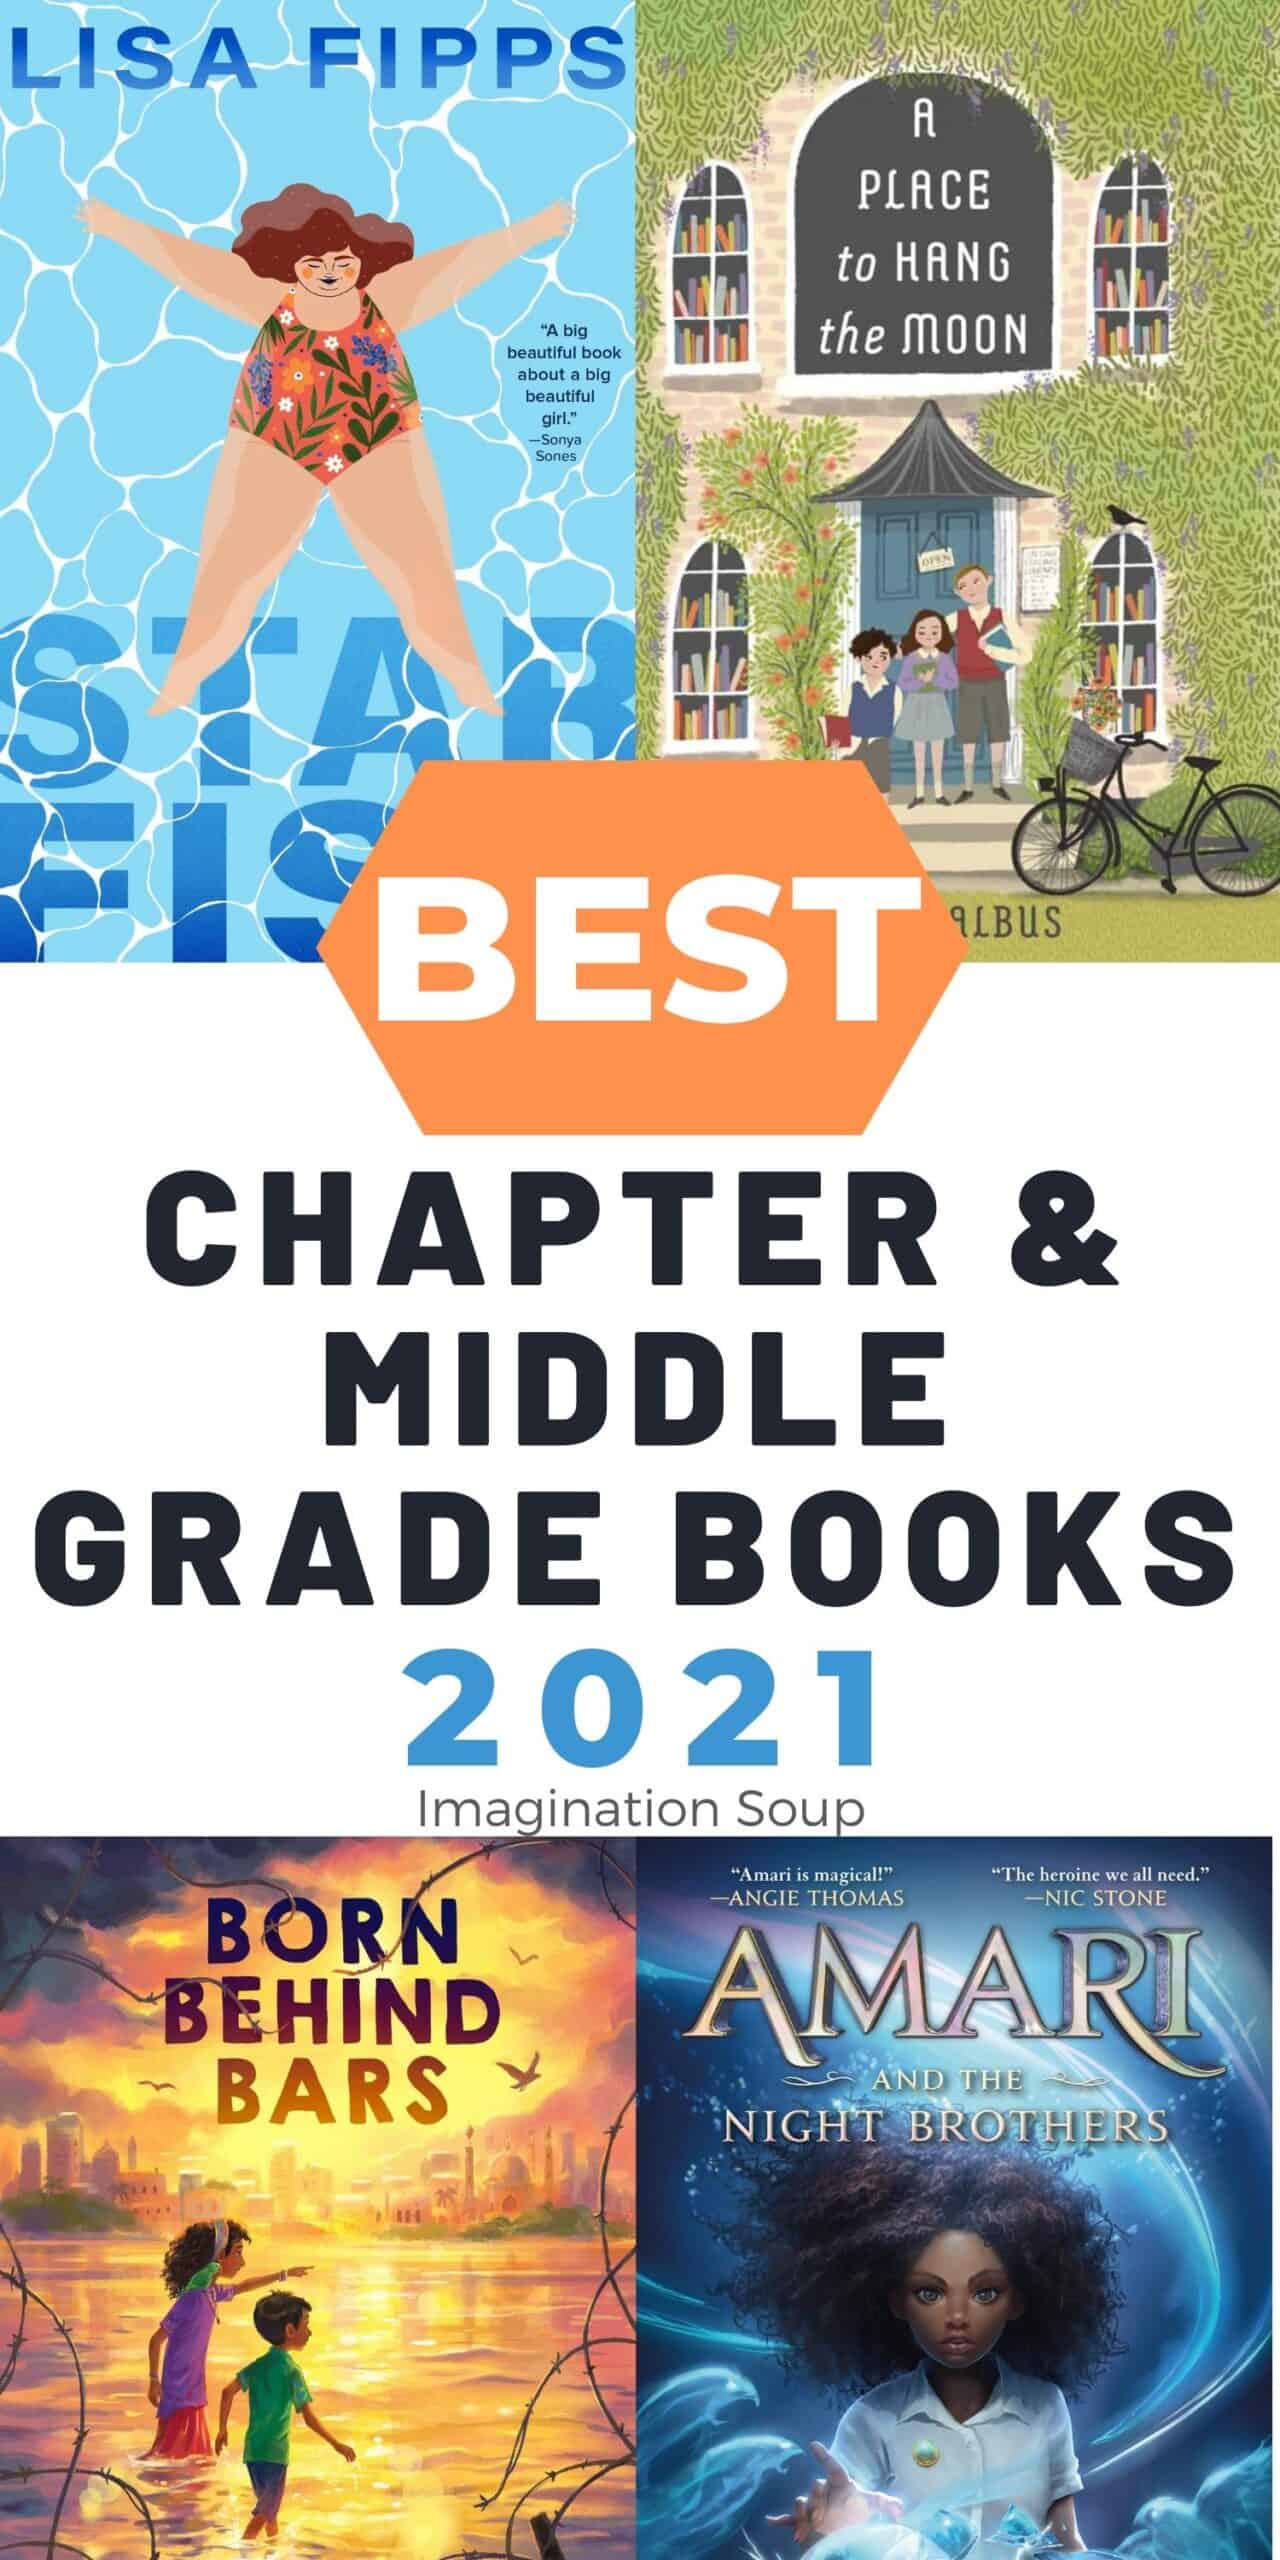 BEST Chapter & Middle Grade Books, 2021